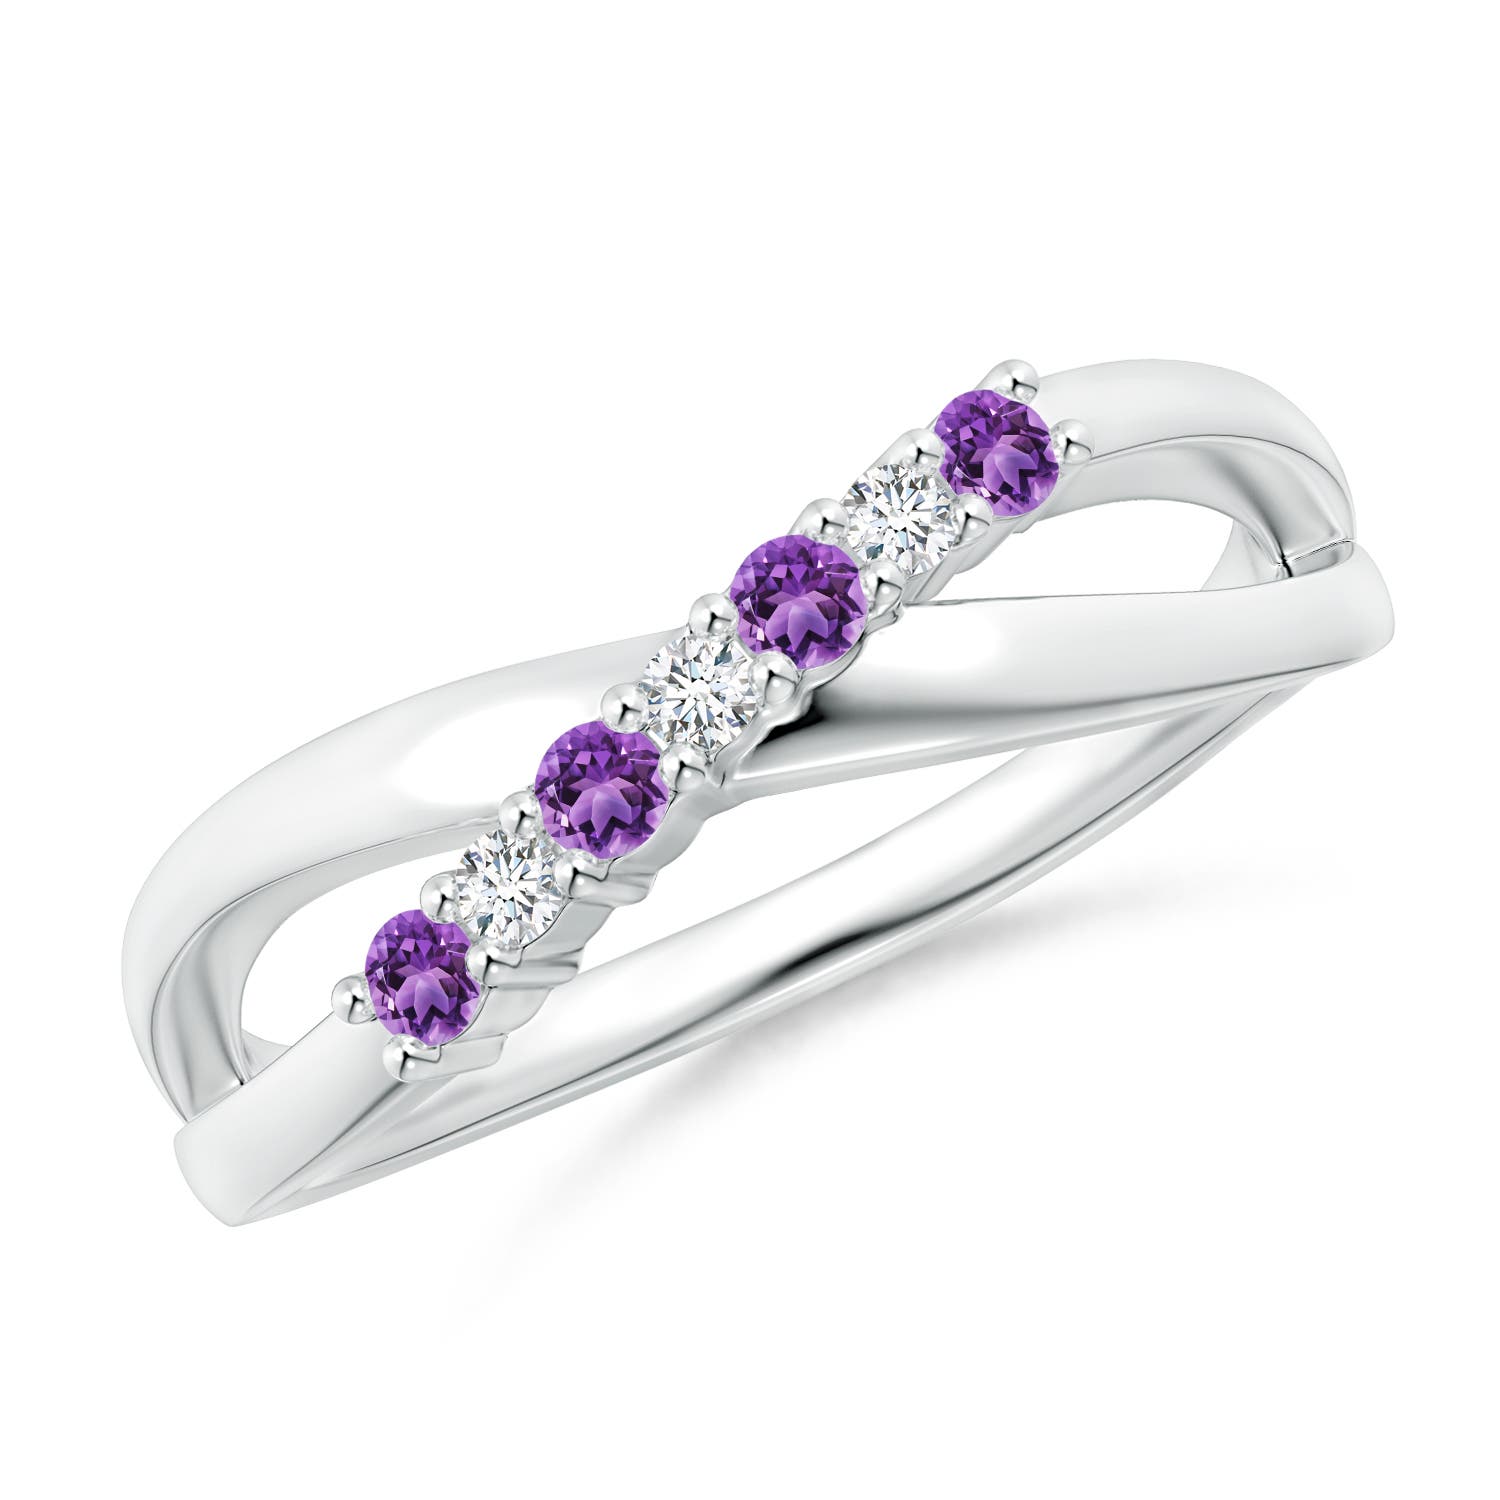 AA - Amethyst / 0.18 CT / 14 KT White Gold